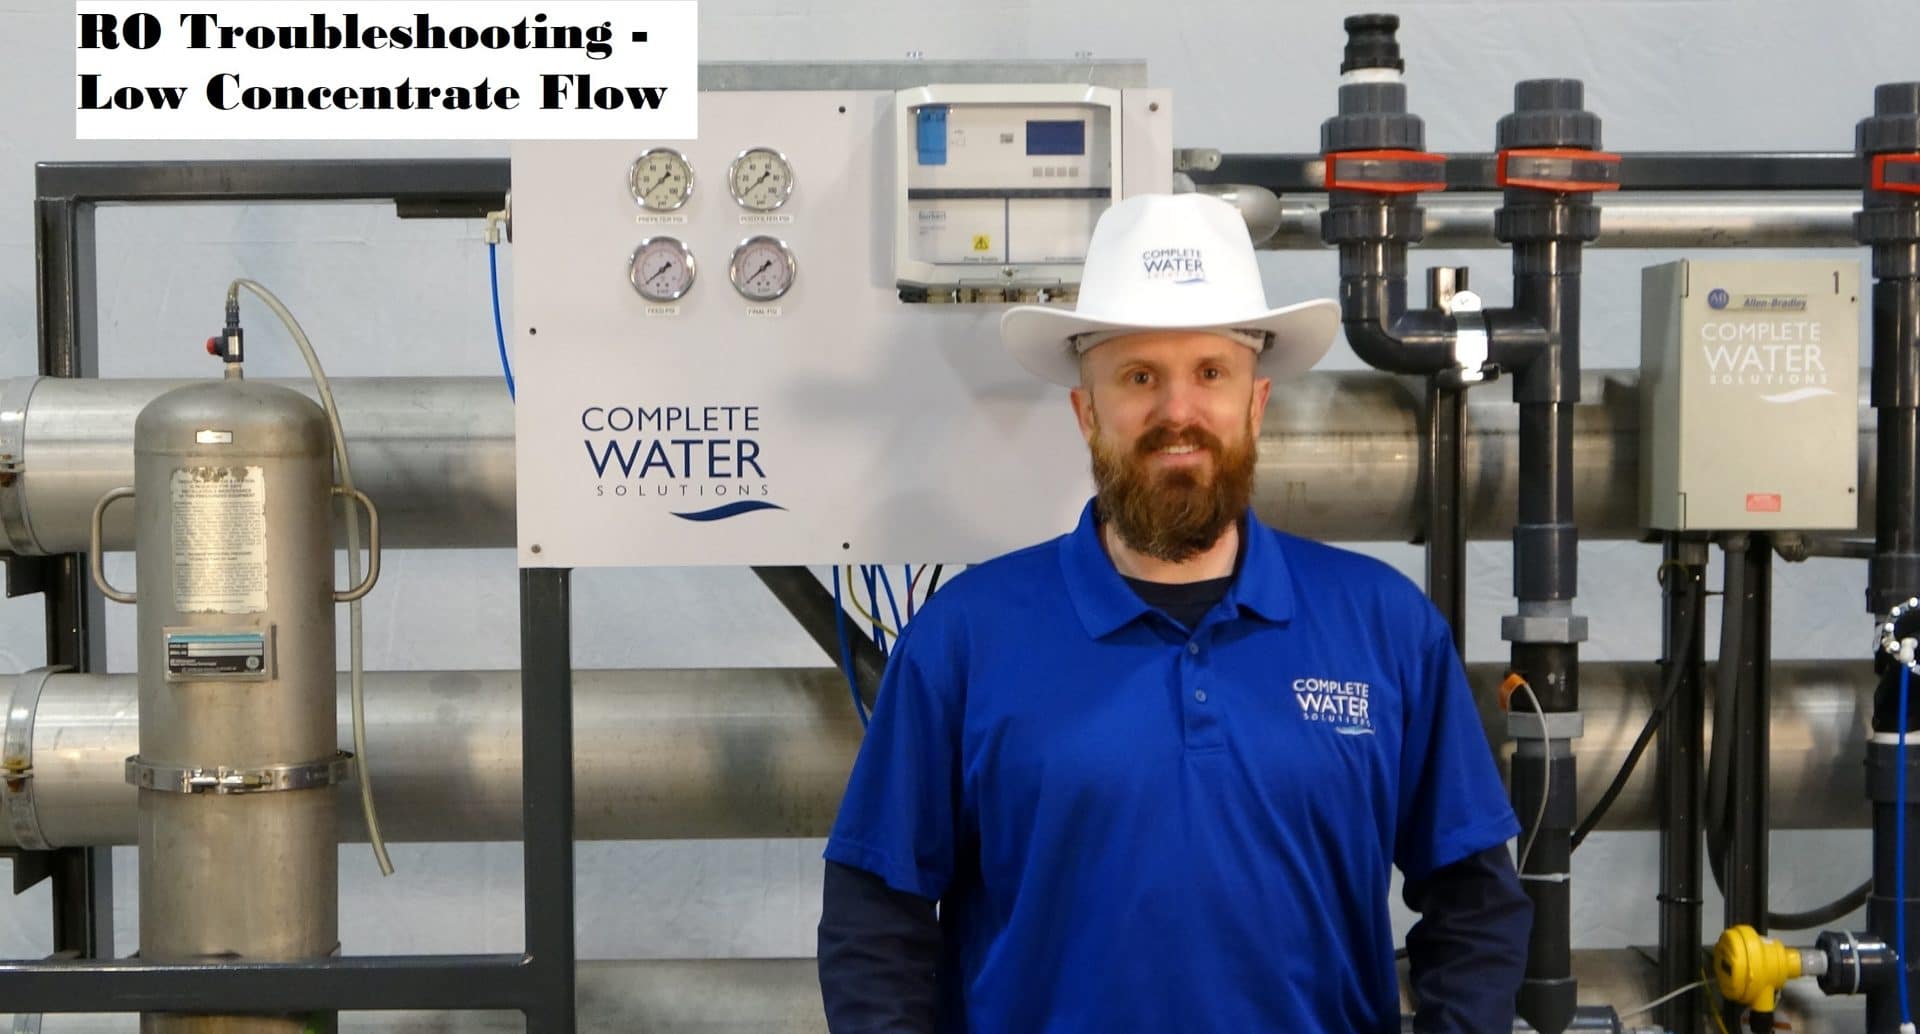 ro troubleshooting, low concentrate flow, low wastewater flow